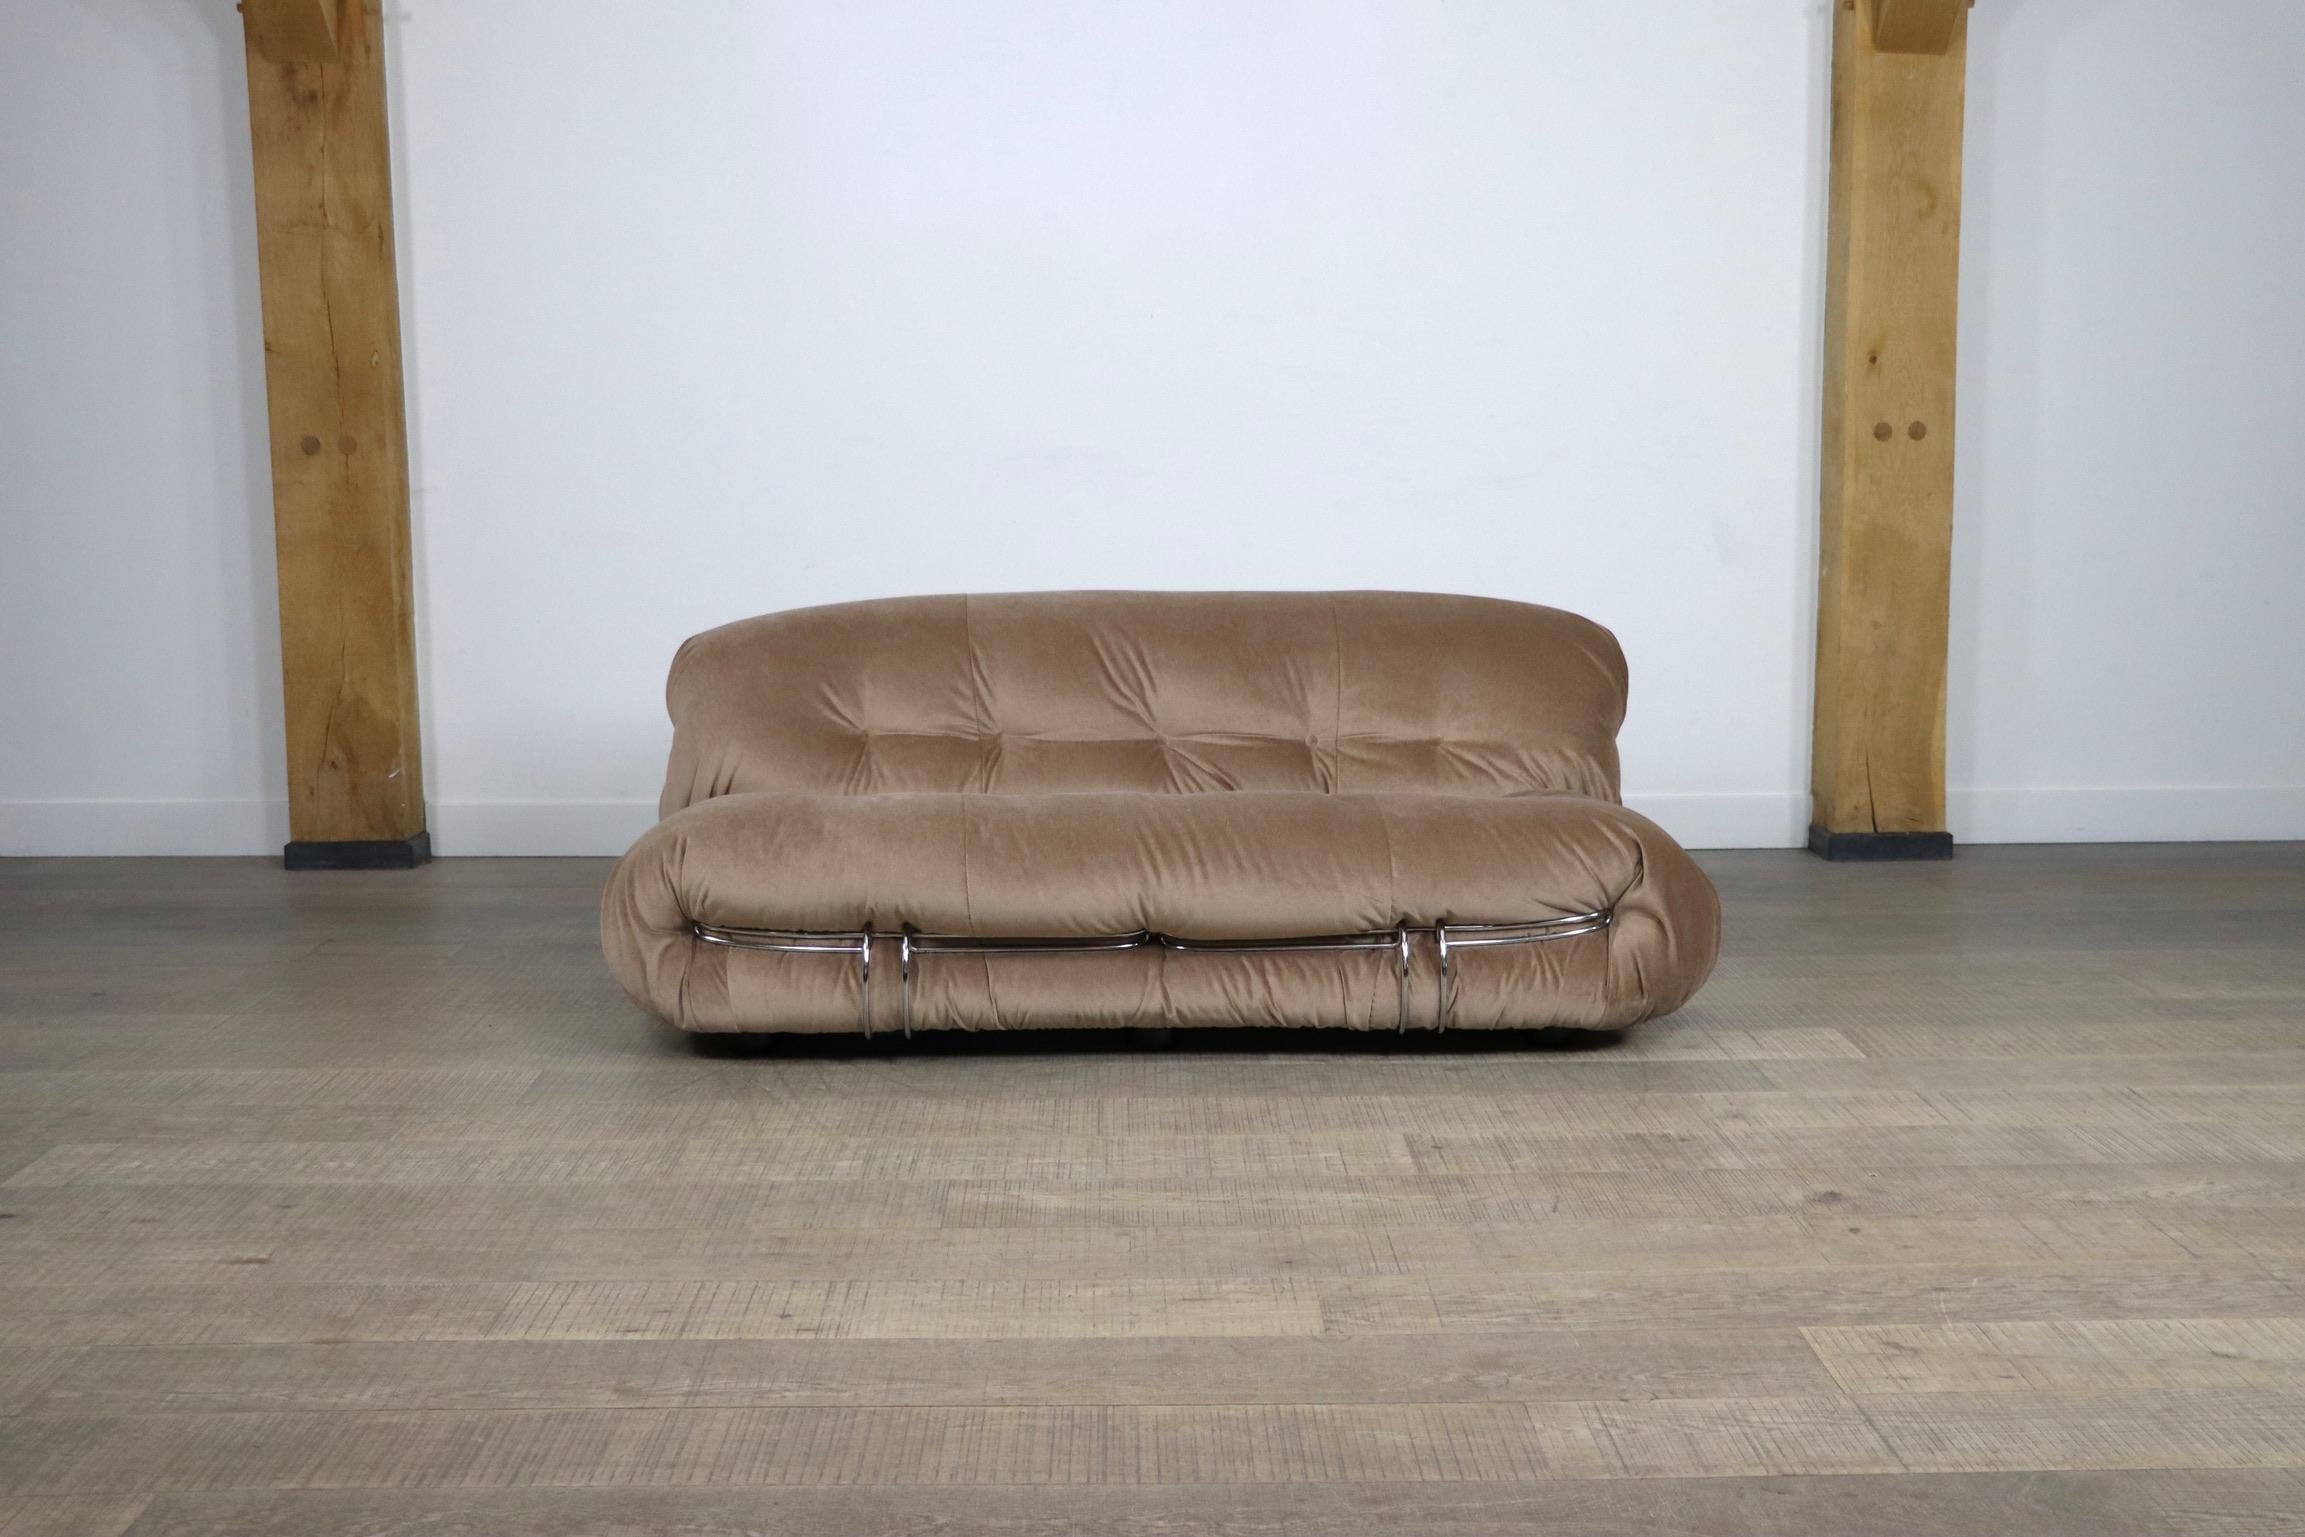 Stunning vintage Soriana two seater sofa by Afra and Tobia Scarpa for Cassina, Italy 1970s. This edition in stunning champagne coloured mohair velvet upholstery will catch anyones eye. The beautiful colour combination with the chrome details makes